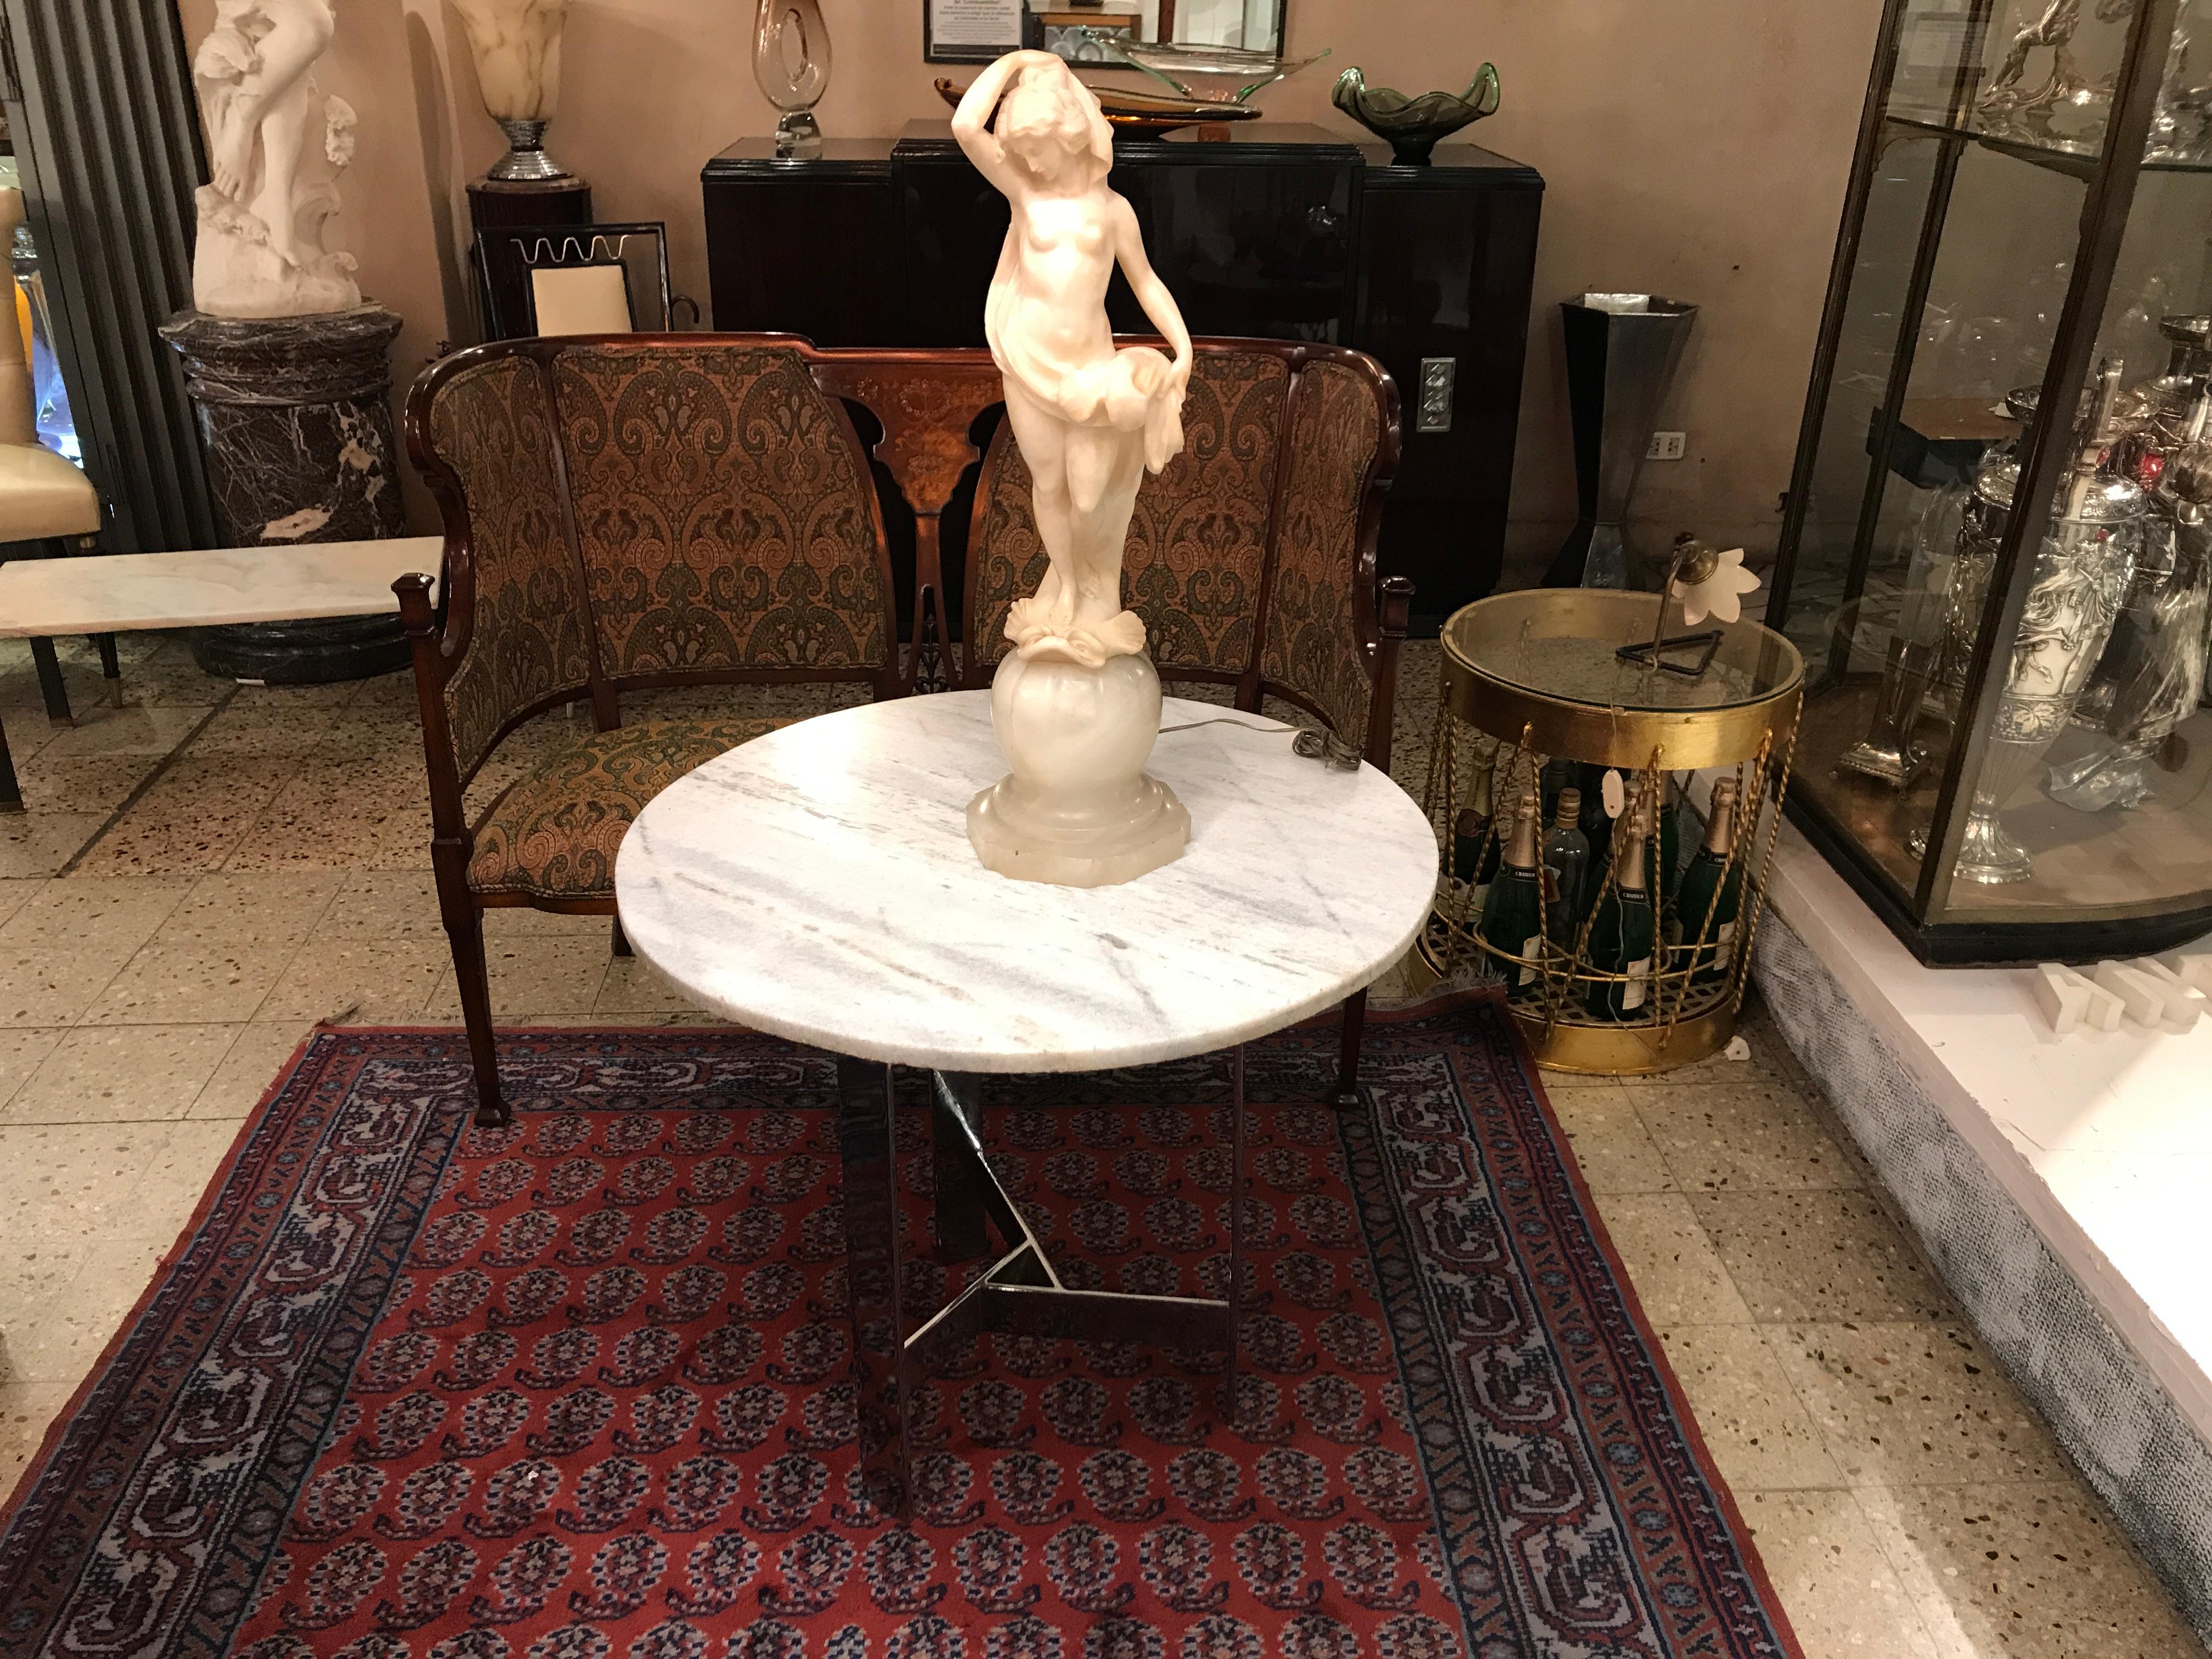 Jugendstil, Art Nouveau, Liberty
We have specialized in the sale of Art Deco and Art Nouveau and Vintage styles since 1982.If you have any questions we are at your disposal.
Pushing the button that reads 'View All From Seller'. And you can see more